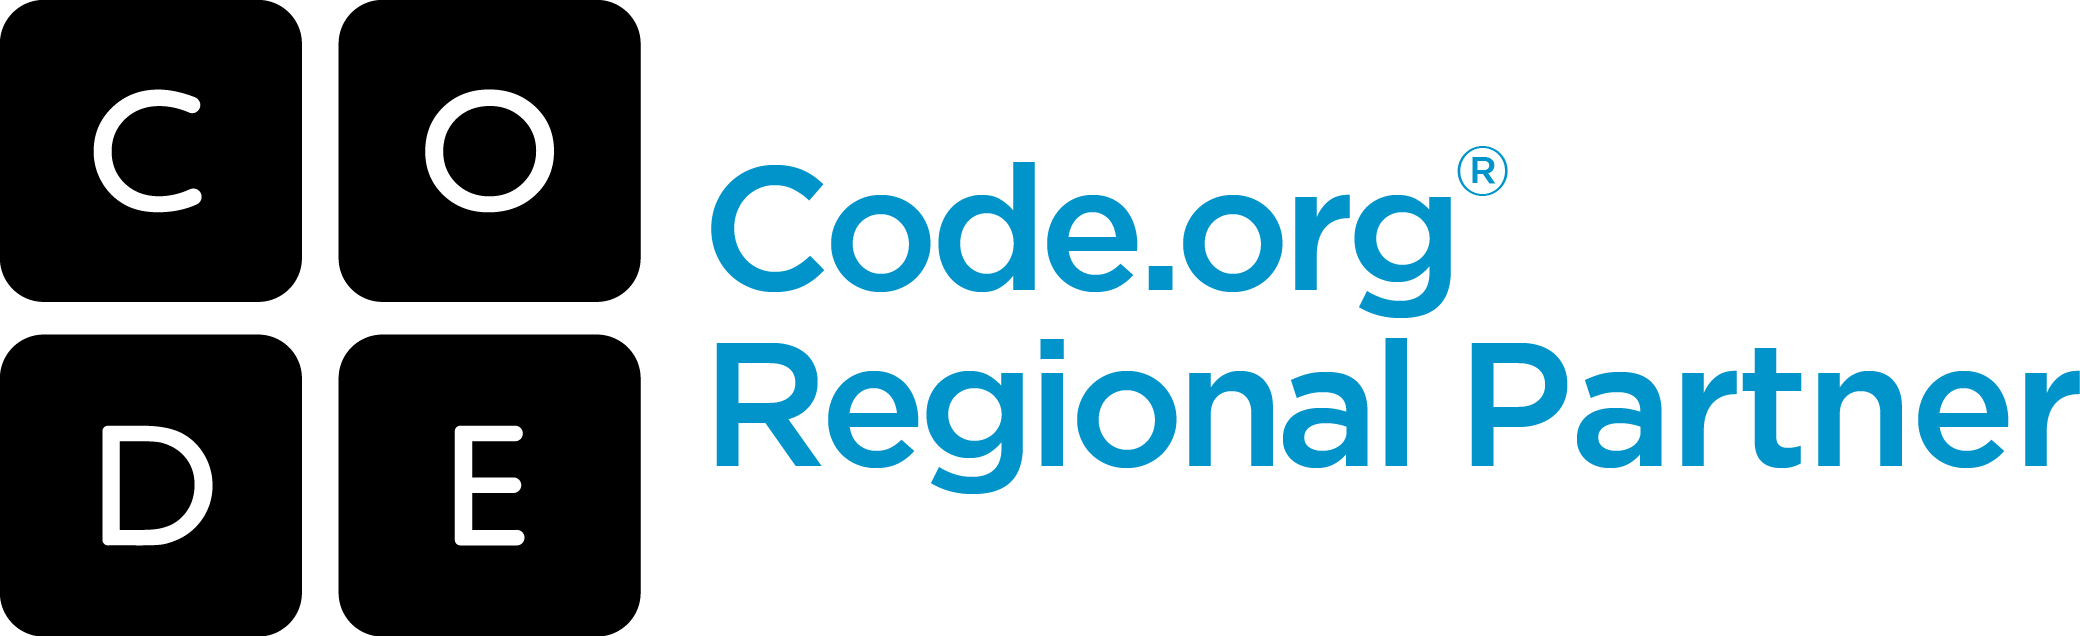 Code.org Logo - About our Regional Partnership with Code.org | University of New ...